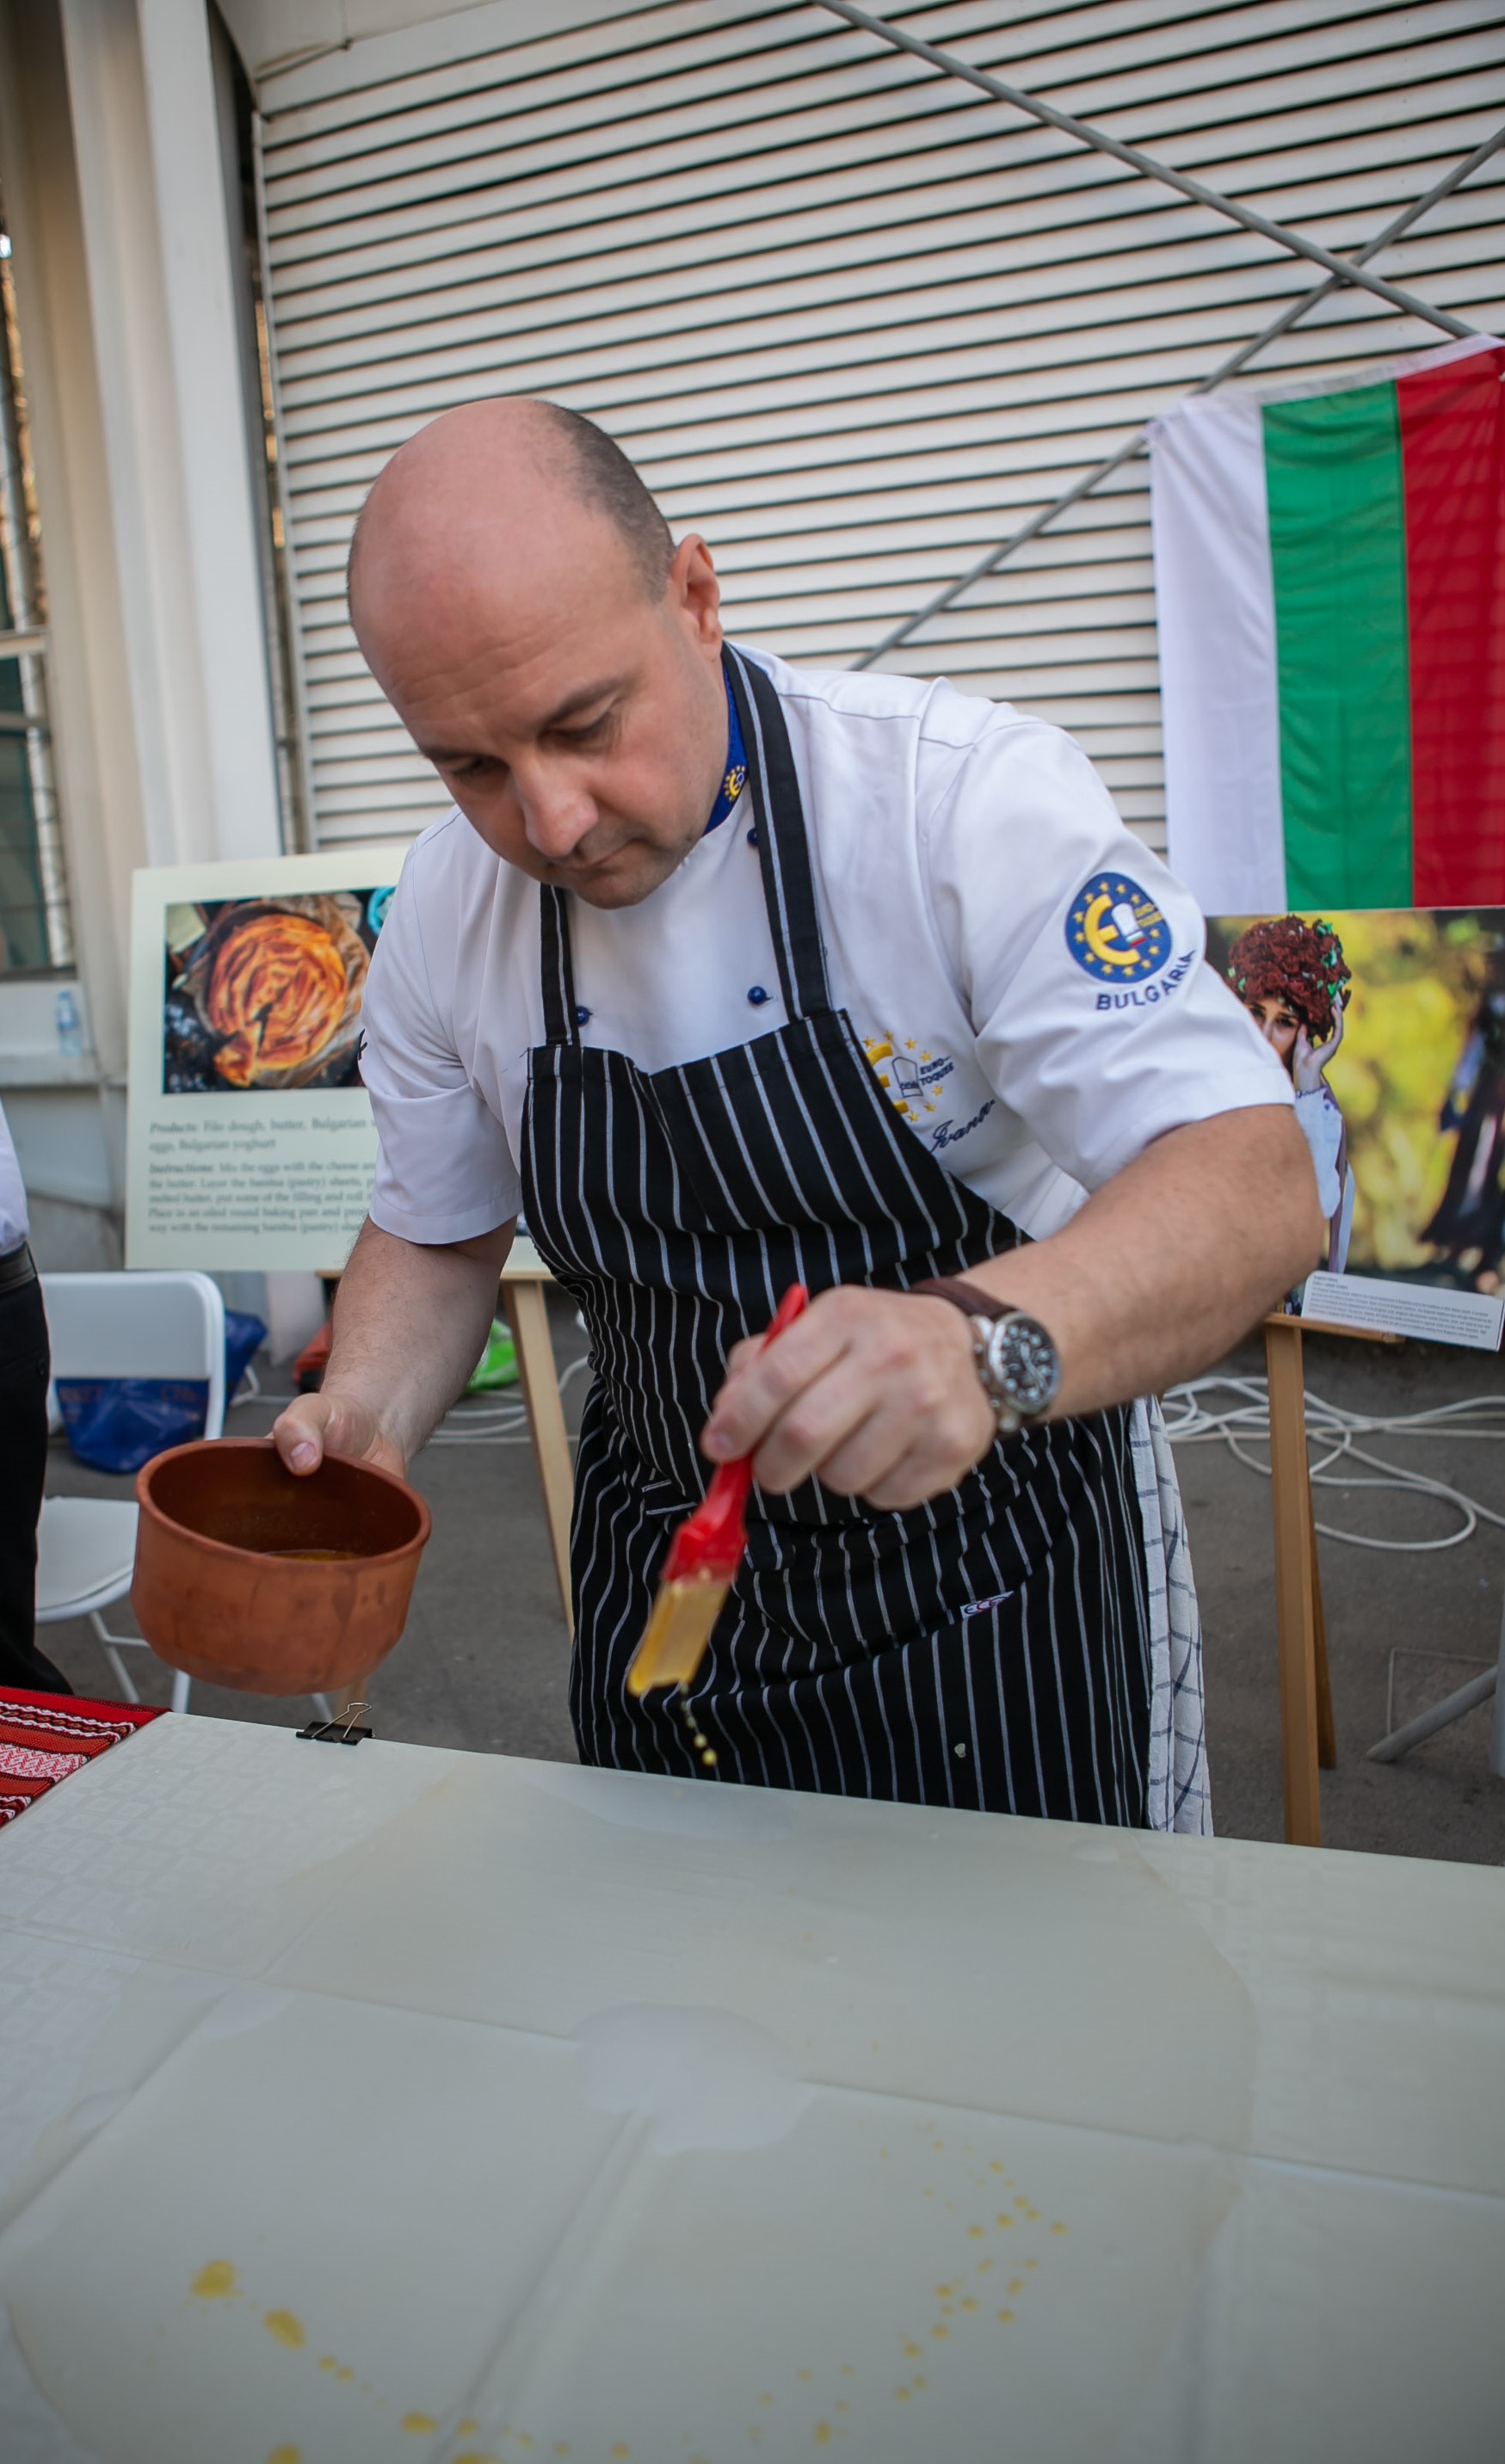 A culinary festival "Taste of Europe" was held for the first time in Baku